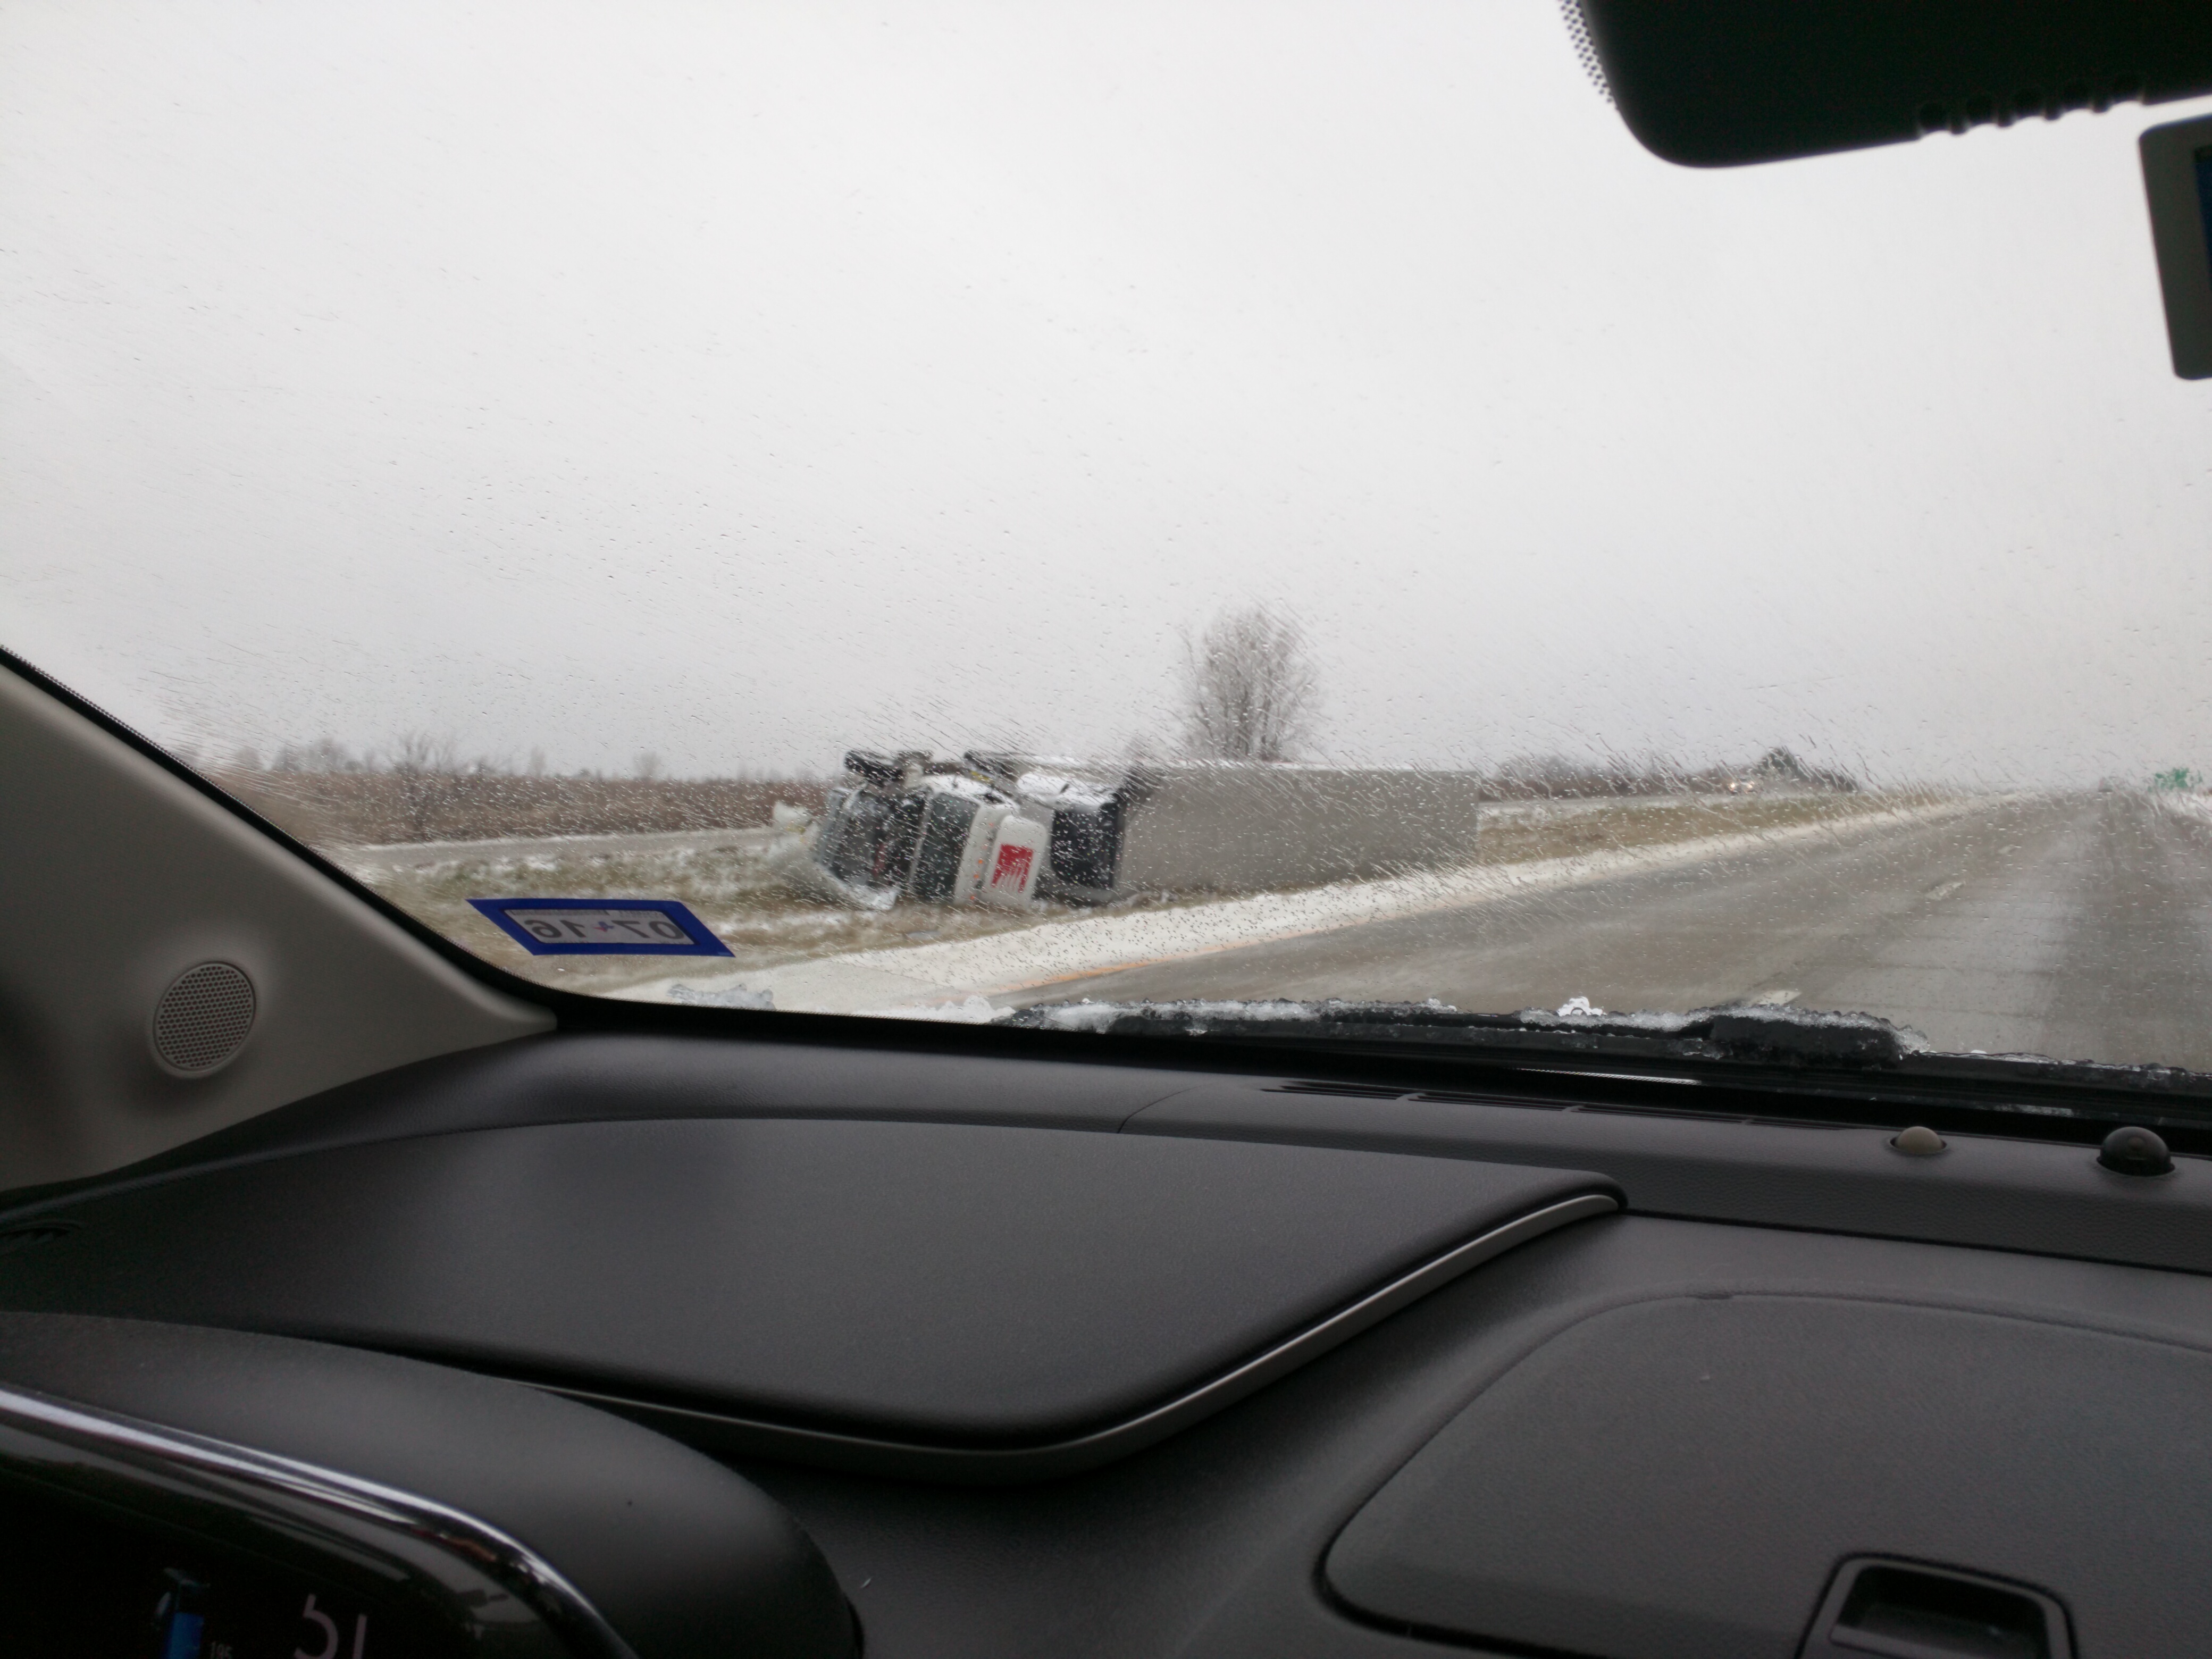 A toppled tractor trailer truck lying in the median ditch of I-35, a victim of the forces of nature parading through the central United States this week.